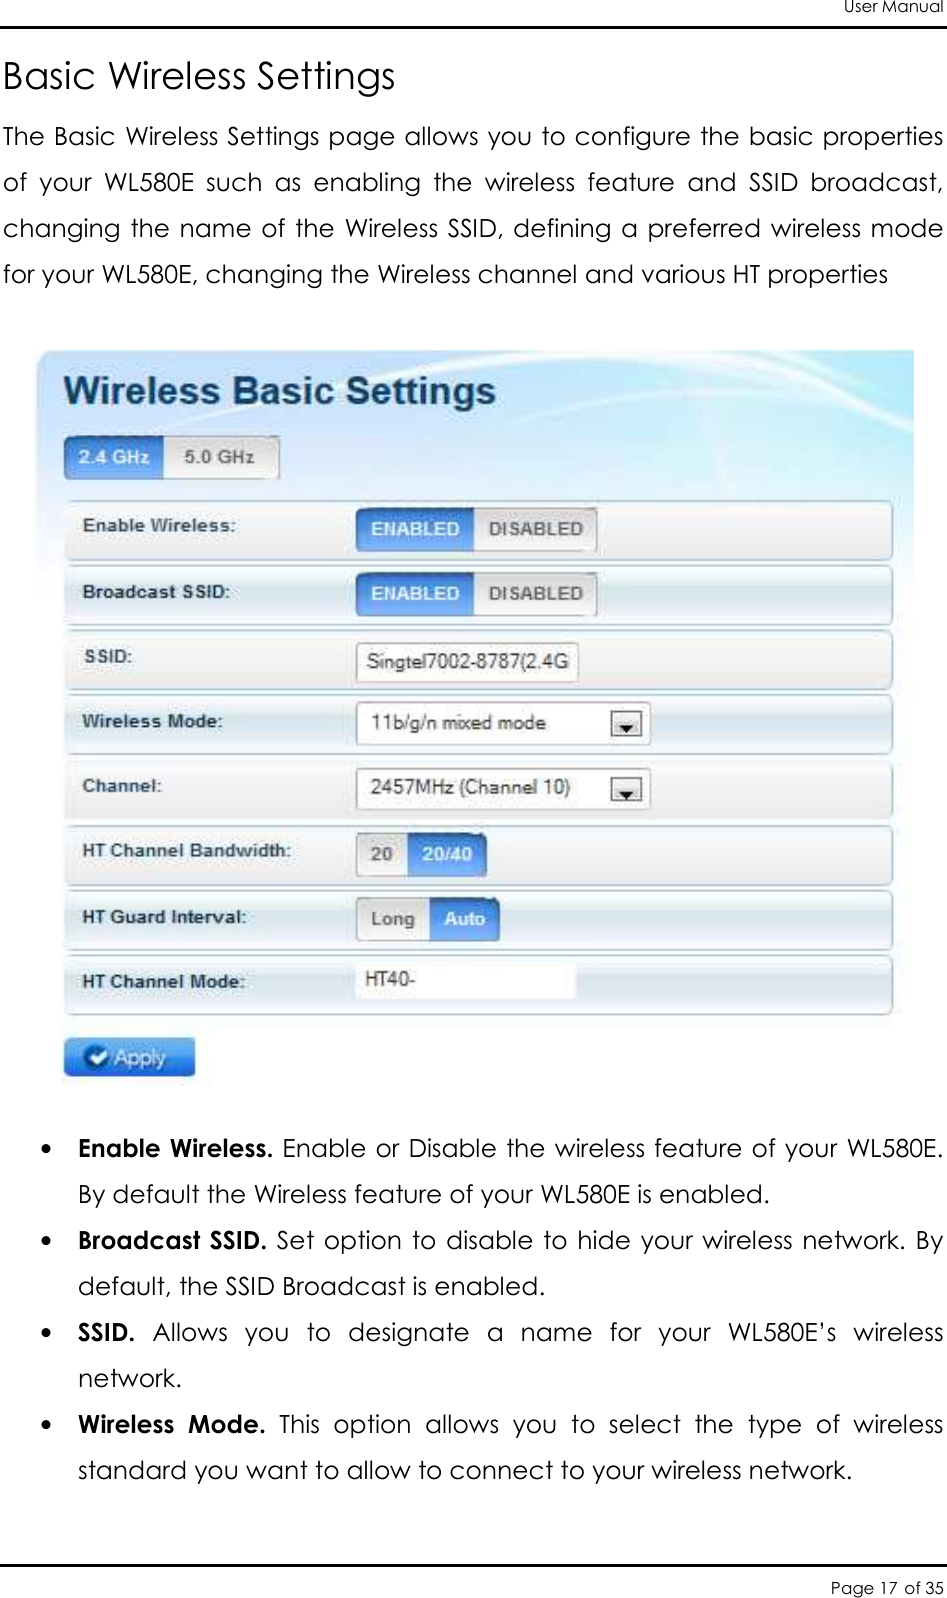 User Manual Page 17 of 35 Basic Wireless Settings The Basic Wireless Settings page allows you to configure the basic properties of  your  WL580E  such  as  enabling  the  wireless  feature  and  SSID  broadcast, changing the name of the Wireless SSID, defining a preferred wireless mode for your WL580E, changing the Wireless channel and various HT properties    • Enable Wireless. Enable or Disable the wireless feature of your WL580E. By default the Wireless feature of your WL580E is enabled.  • Broadcast SSID. Set option to disable to hide your wireless network. By default, the SSID Broadcast is enabled.  • SSID.  Allows  you  to  designate  a  name  for  your  WL580E’s  wireless network.  • Wireless  Mode.  This  option  allows  you  to  select  the  type  of  wireless standard you want to allow to connect to your wireless network.   